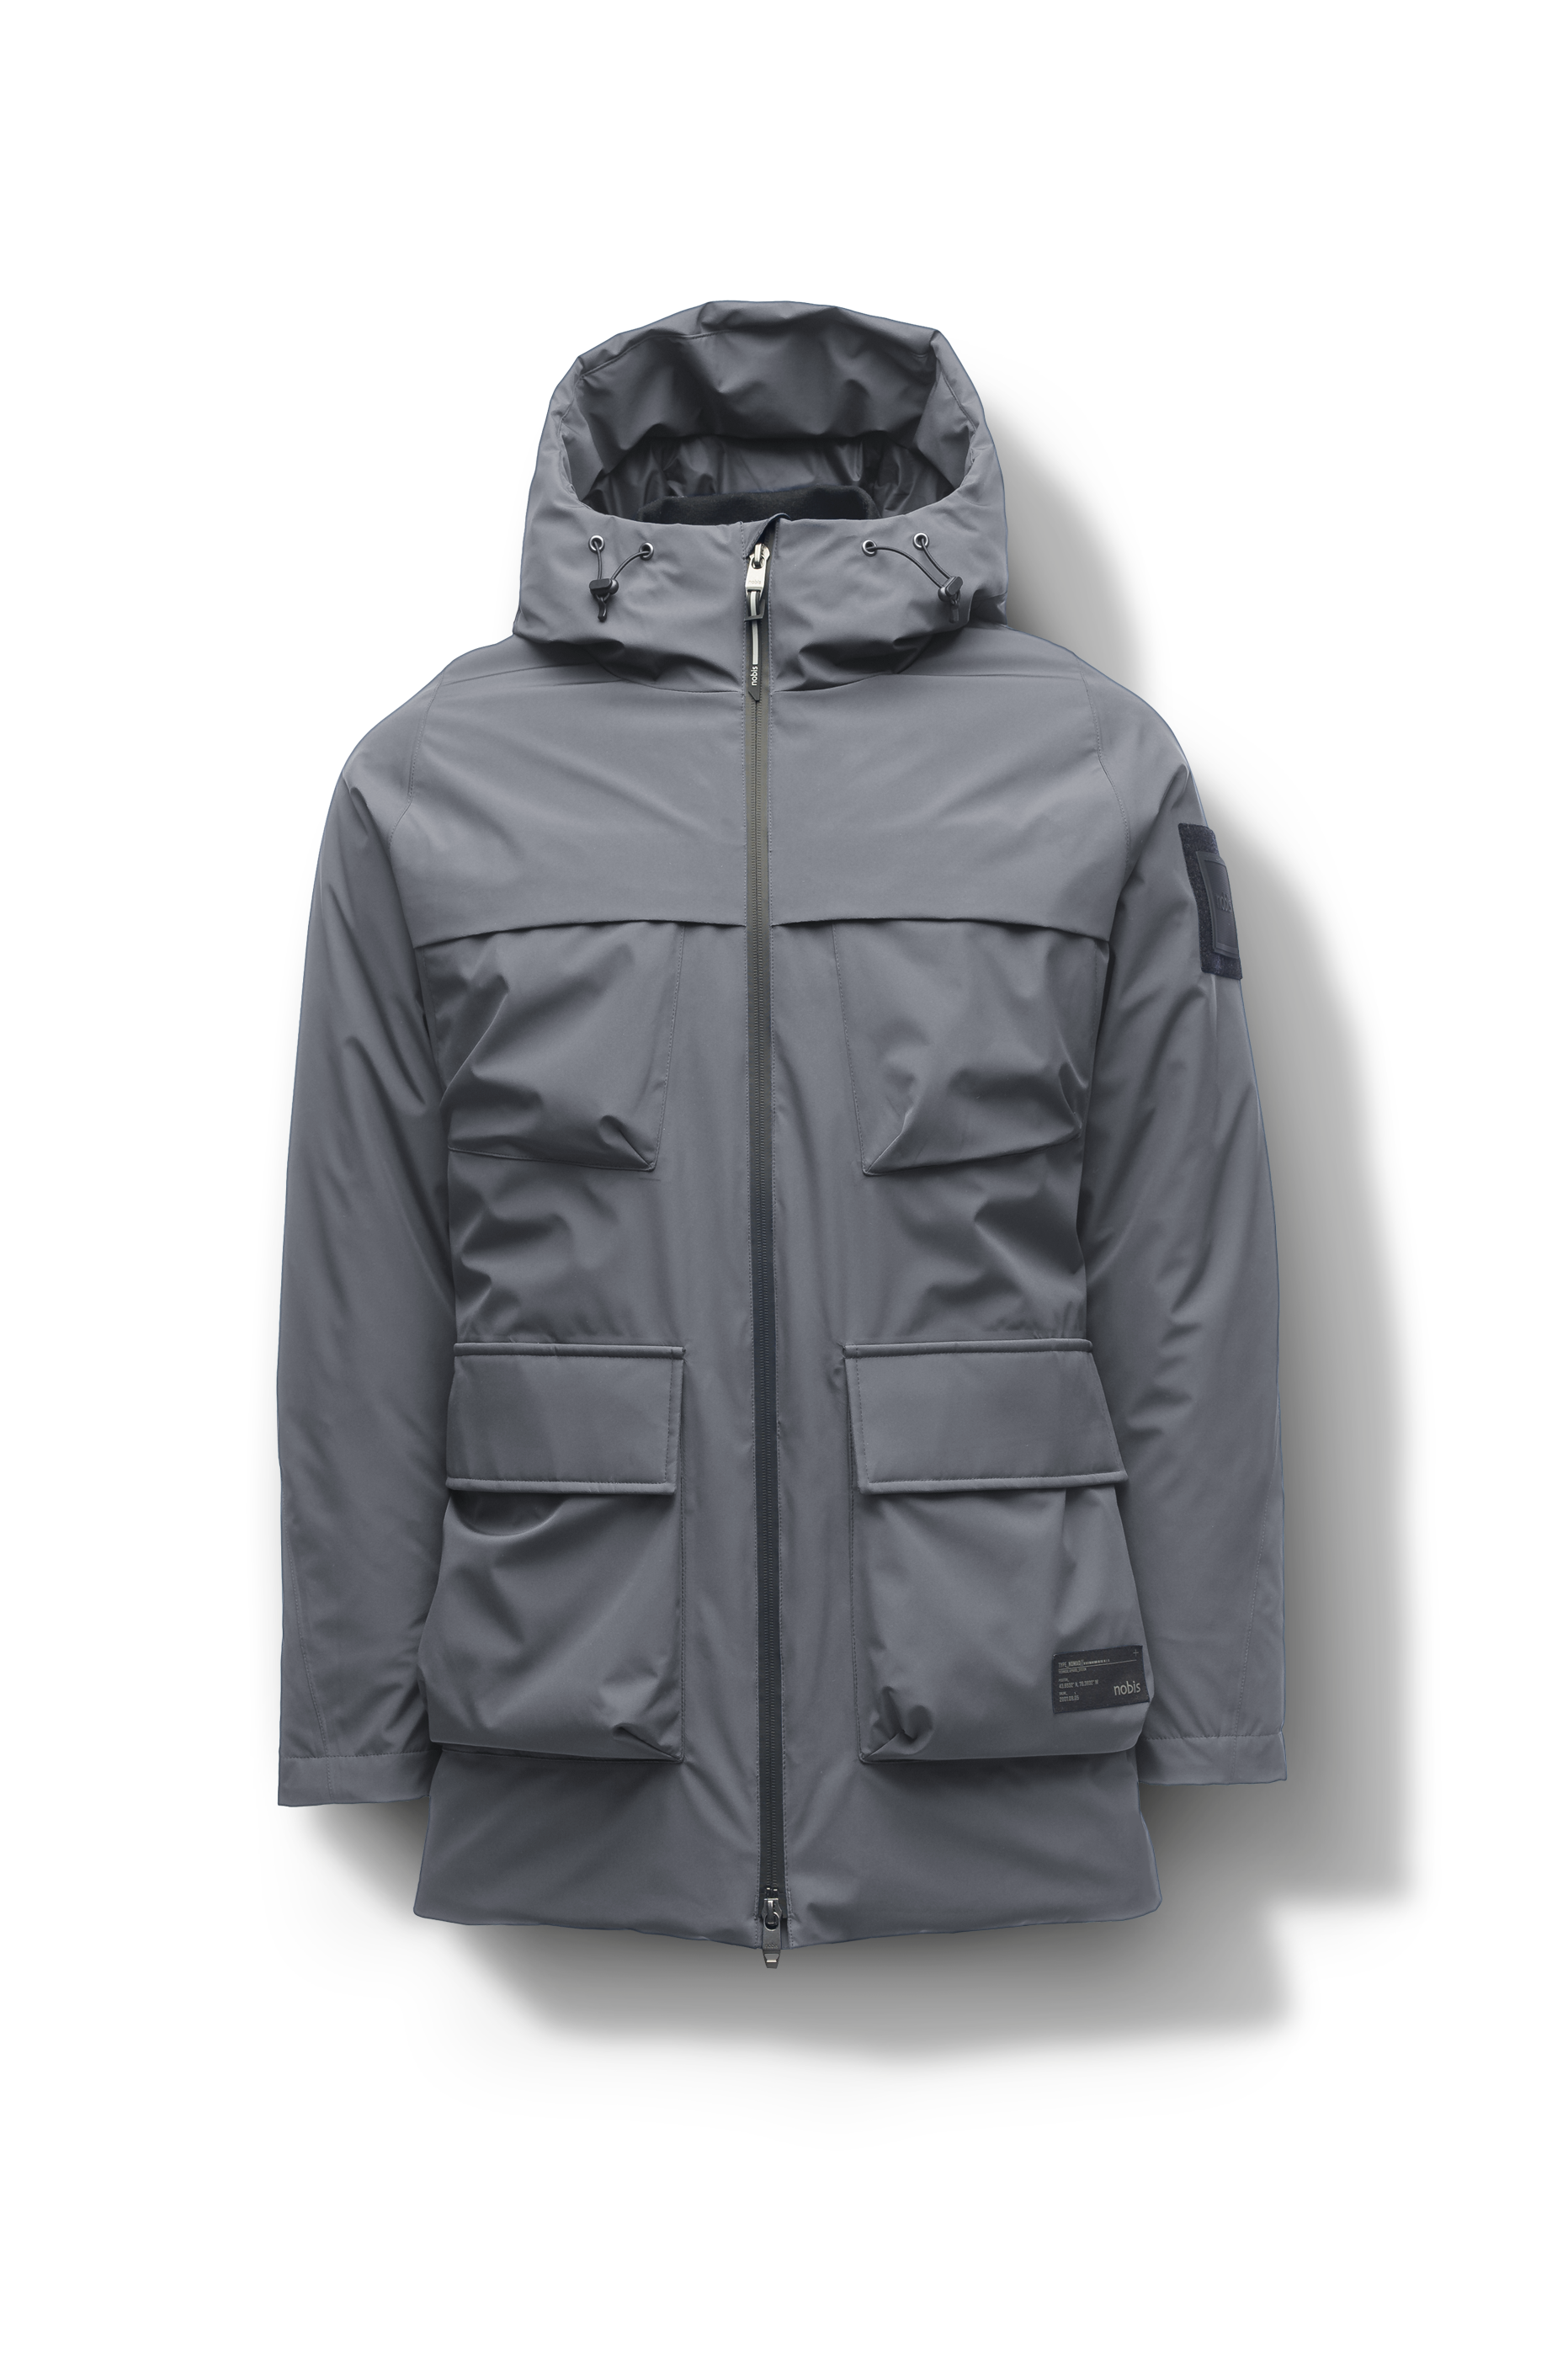 Ronin Men's Performance Utility Jacket in thigh length, premium 3-ply micro denier and stretch ripstop fabrication, Premium Canadian origin White Duck Down insulation, non-removable down-filled hood, bellow chest pockets, magnetic closure waist flap pockets, two-way centre-front zipper, pit zipper vents, hidden adjustable waist drawcord, in Concrete